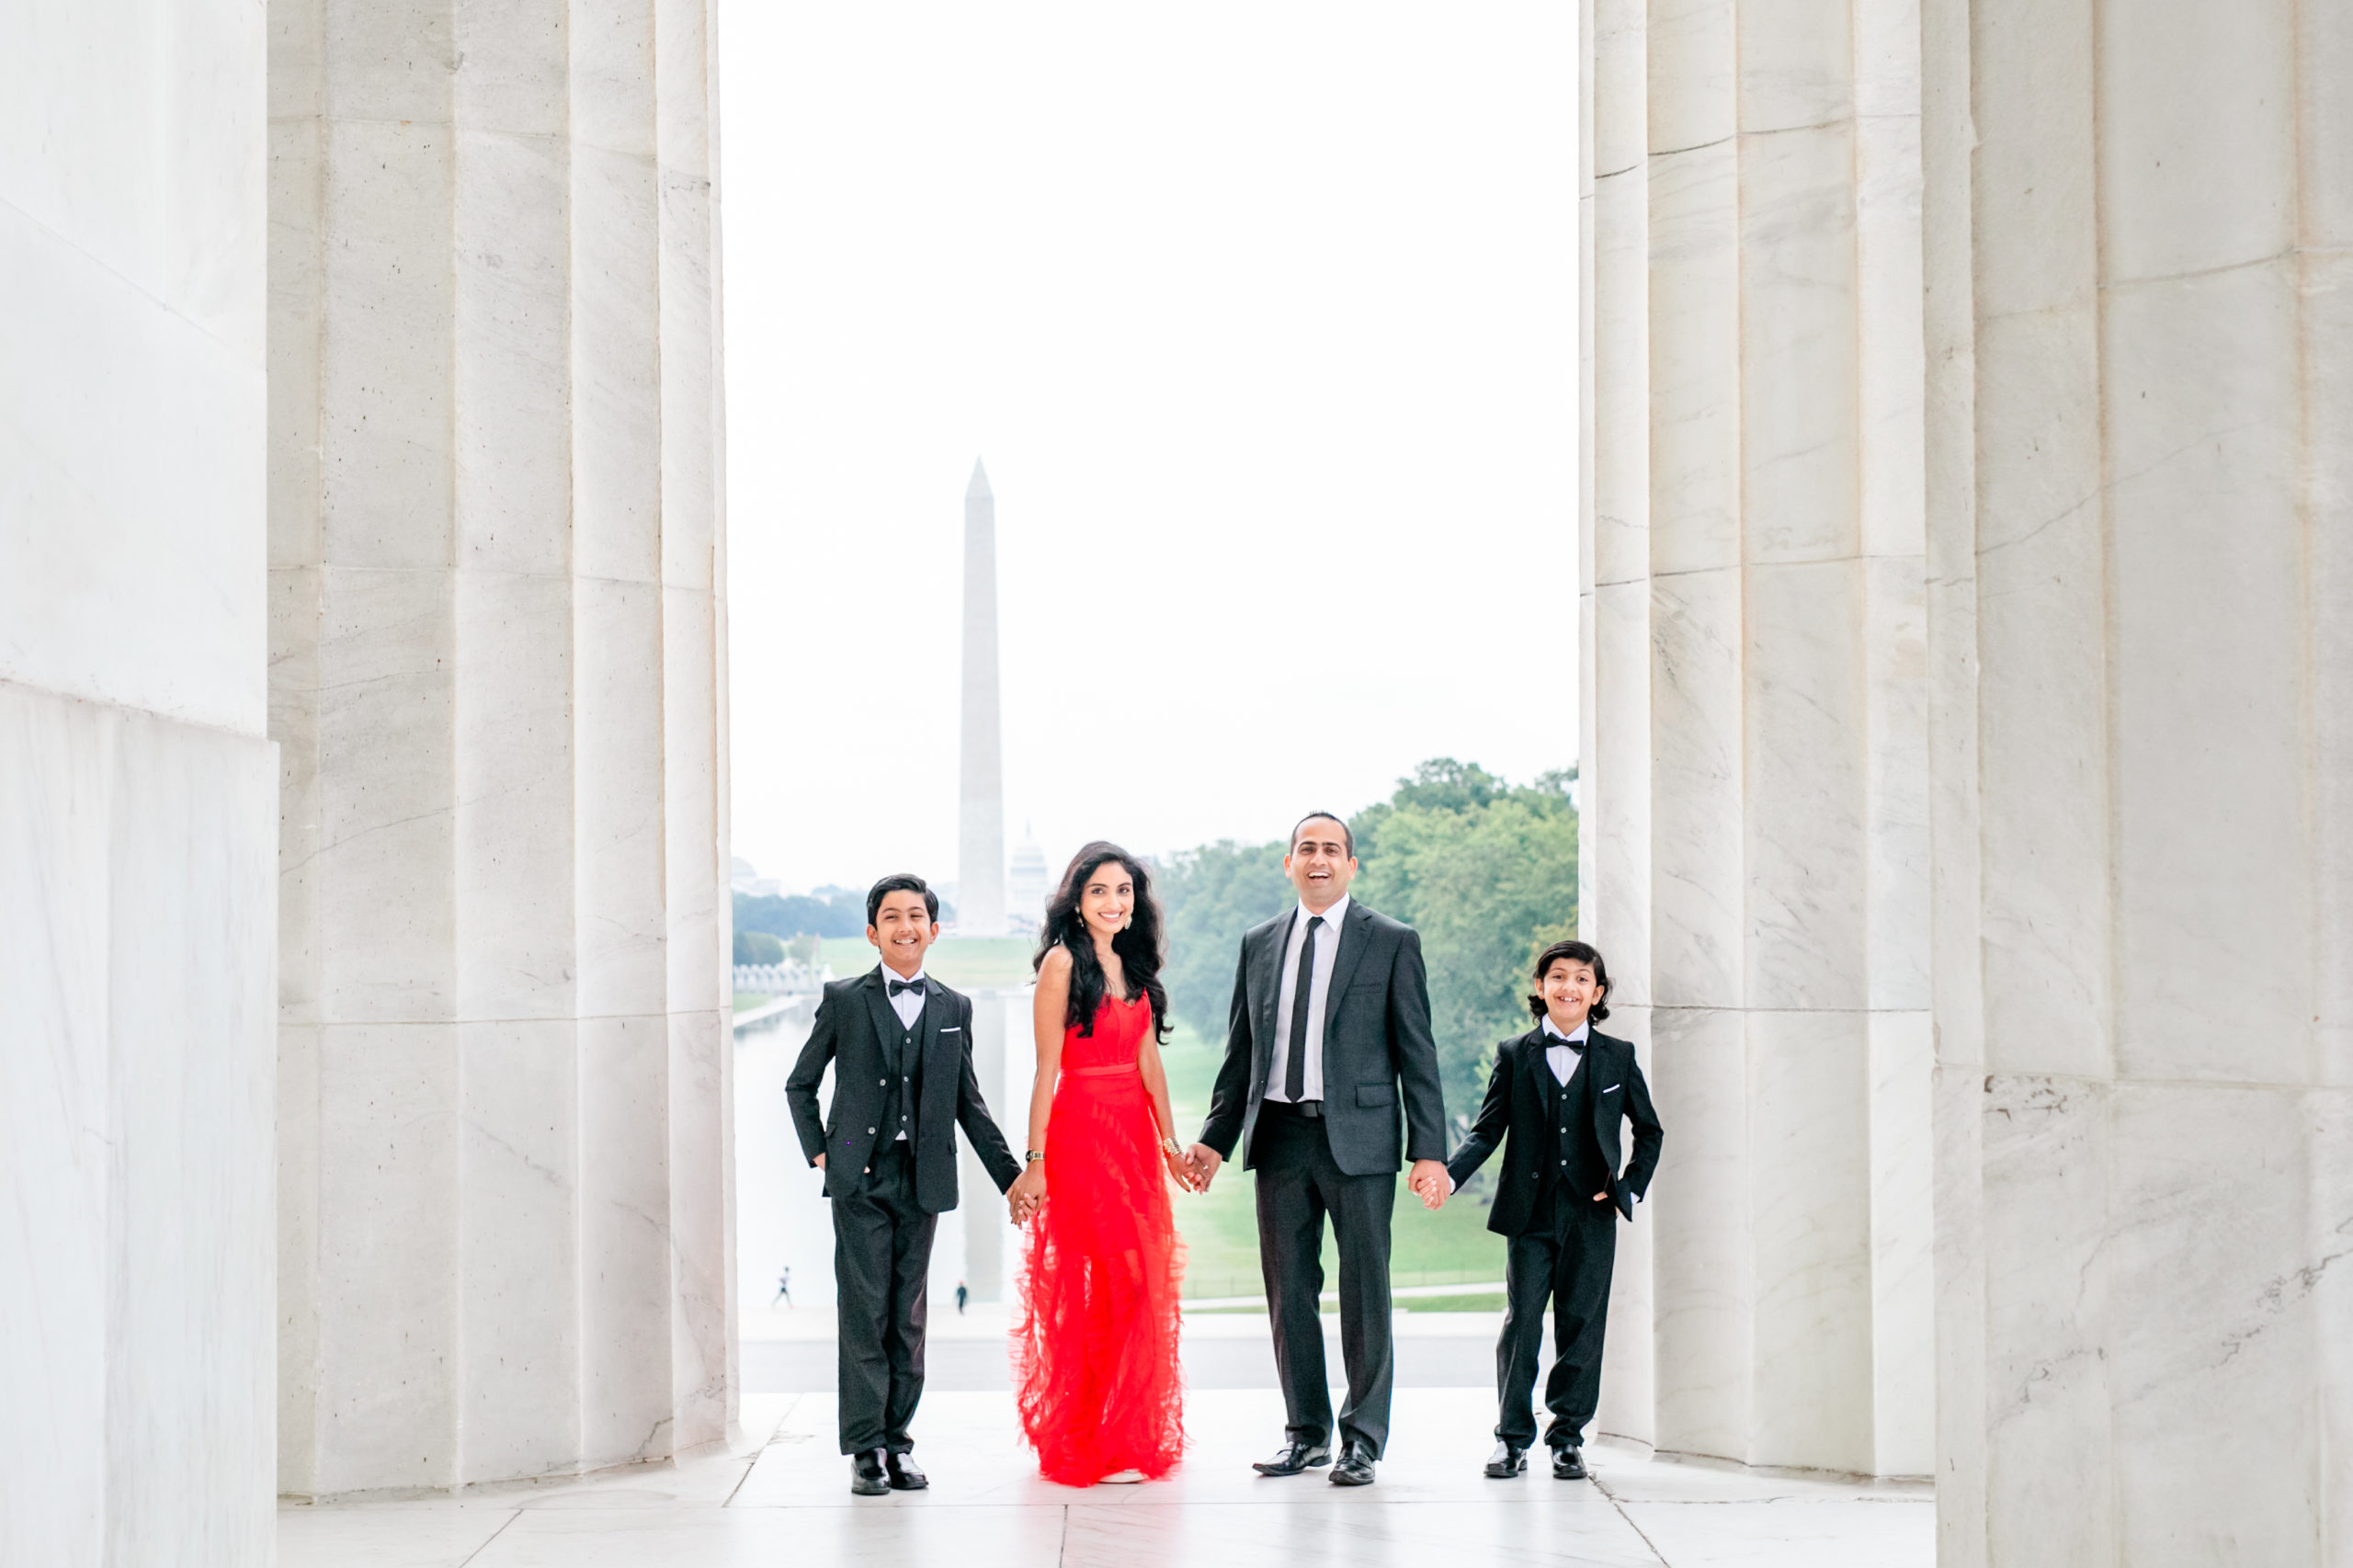 formal Lincoln Memorial family photos, formal family portraits, Lincoln Memorial portraits, Washington DC family photos, National Mall portraits, Rachel E.H. Photography, formal family photos, DC photographer, family of four, red dress, black tie family photos